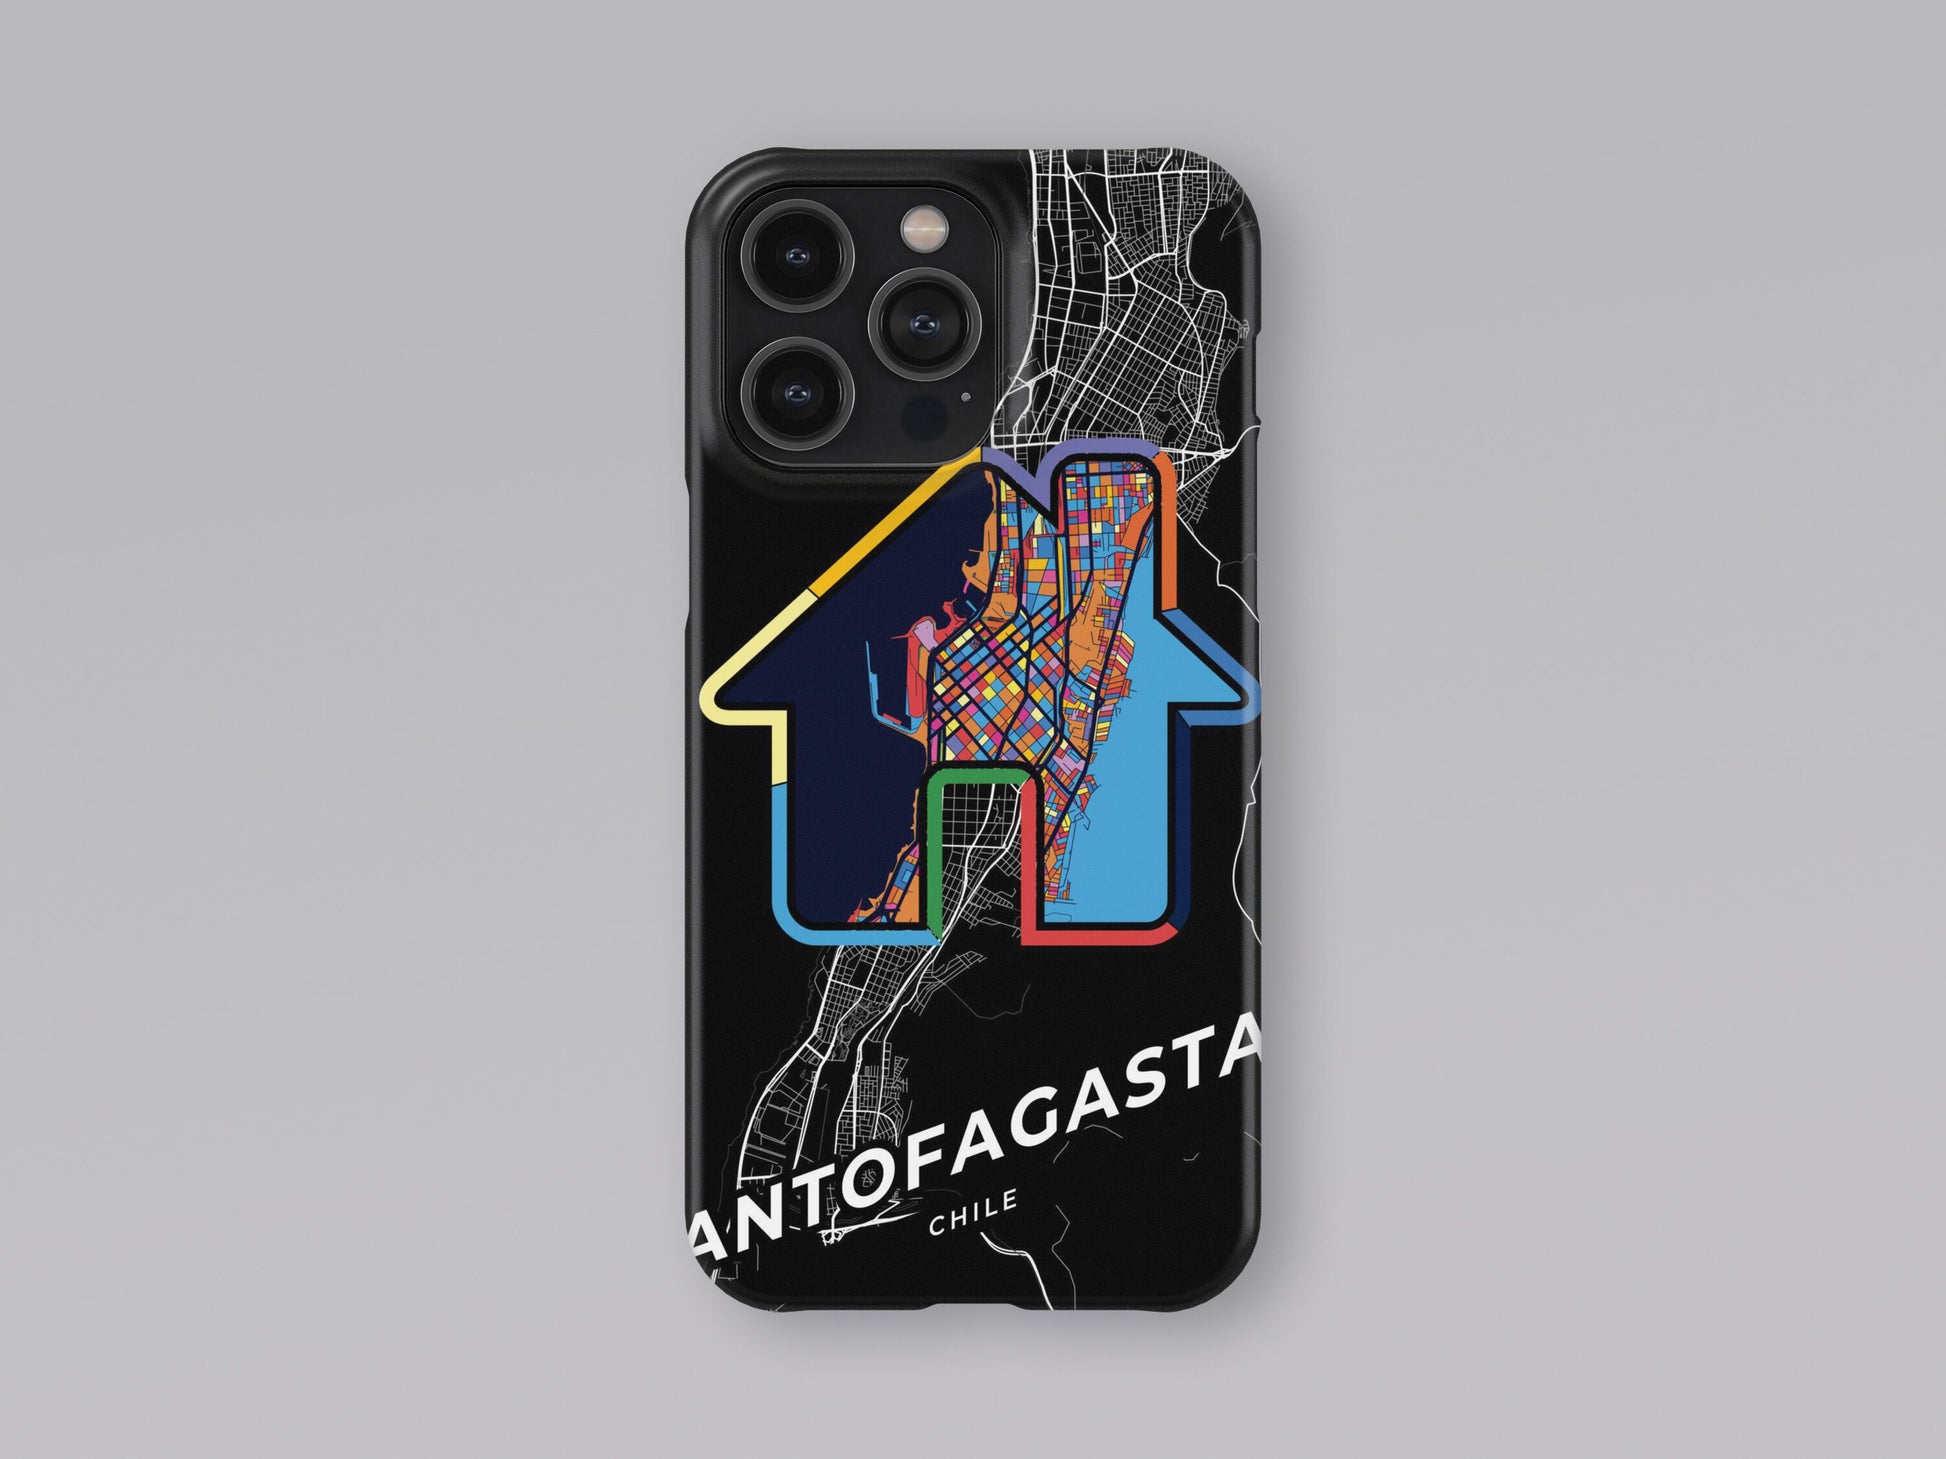 Antofagasta Chile slim phone case with colorful icon. Birthday, wedding or housewarming gift. Couple match cases. 3